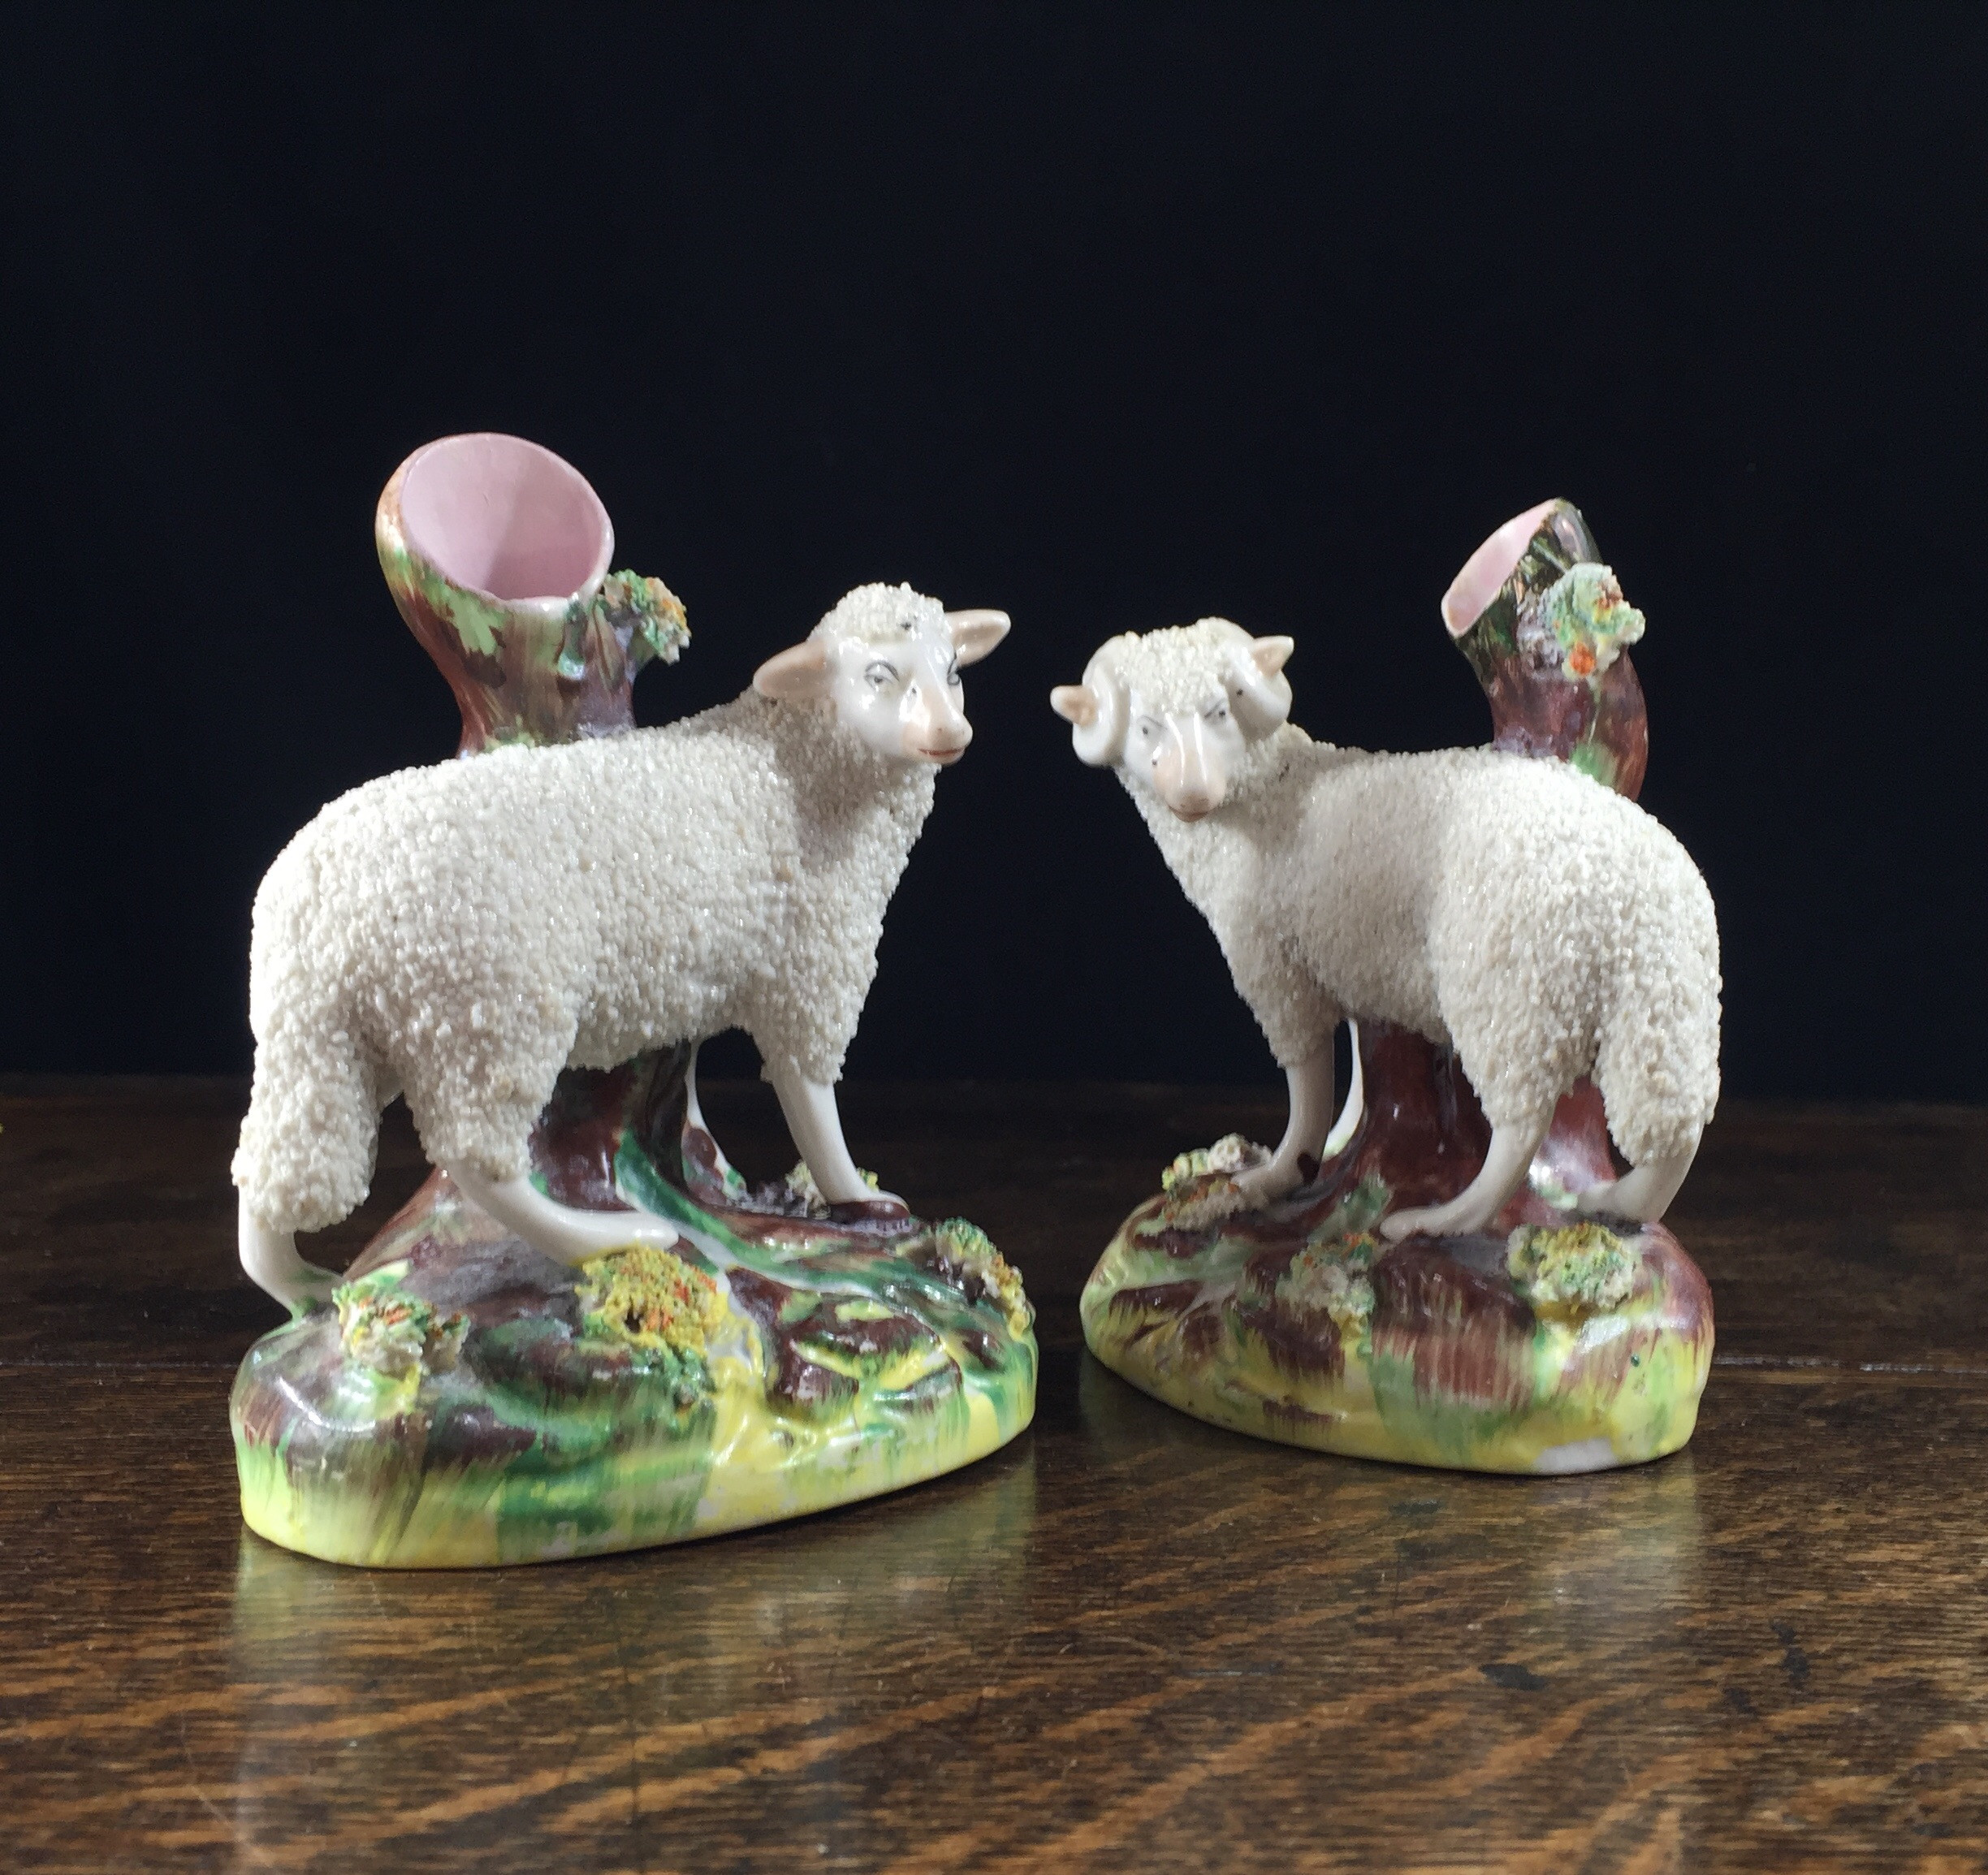 11 Great Staffordshire Spill Vases 2024 free download staffordshire spill vases of pair of staffordshire sheep spill vases circa 1860 moorabool in pair of staffordshire sheep spill vases circa 1860 0